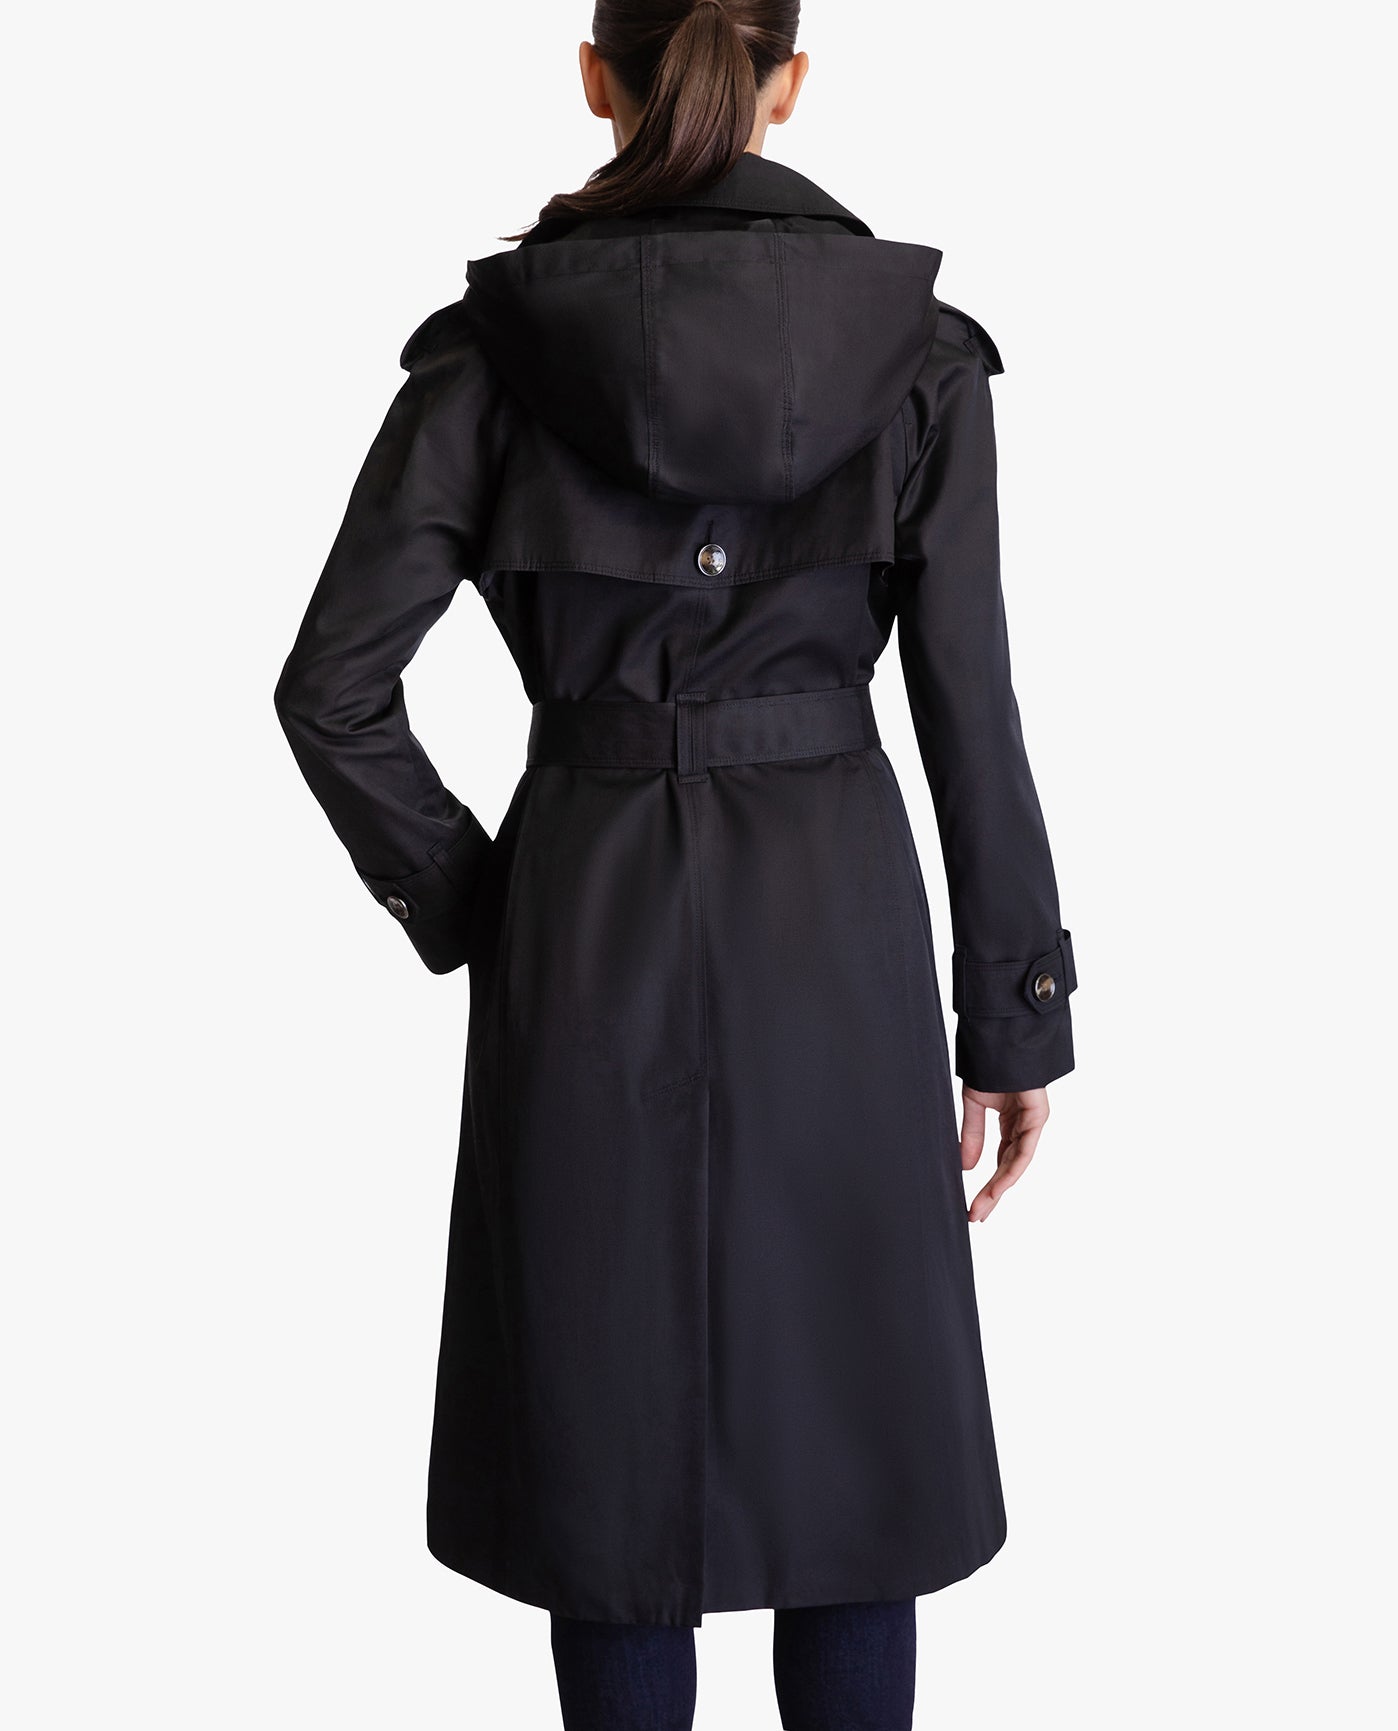 BACK OF  DOUBLE BREASTED BUTTON FRONT HOODED TRENCH WITH BELT | BLACK